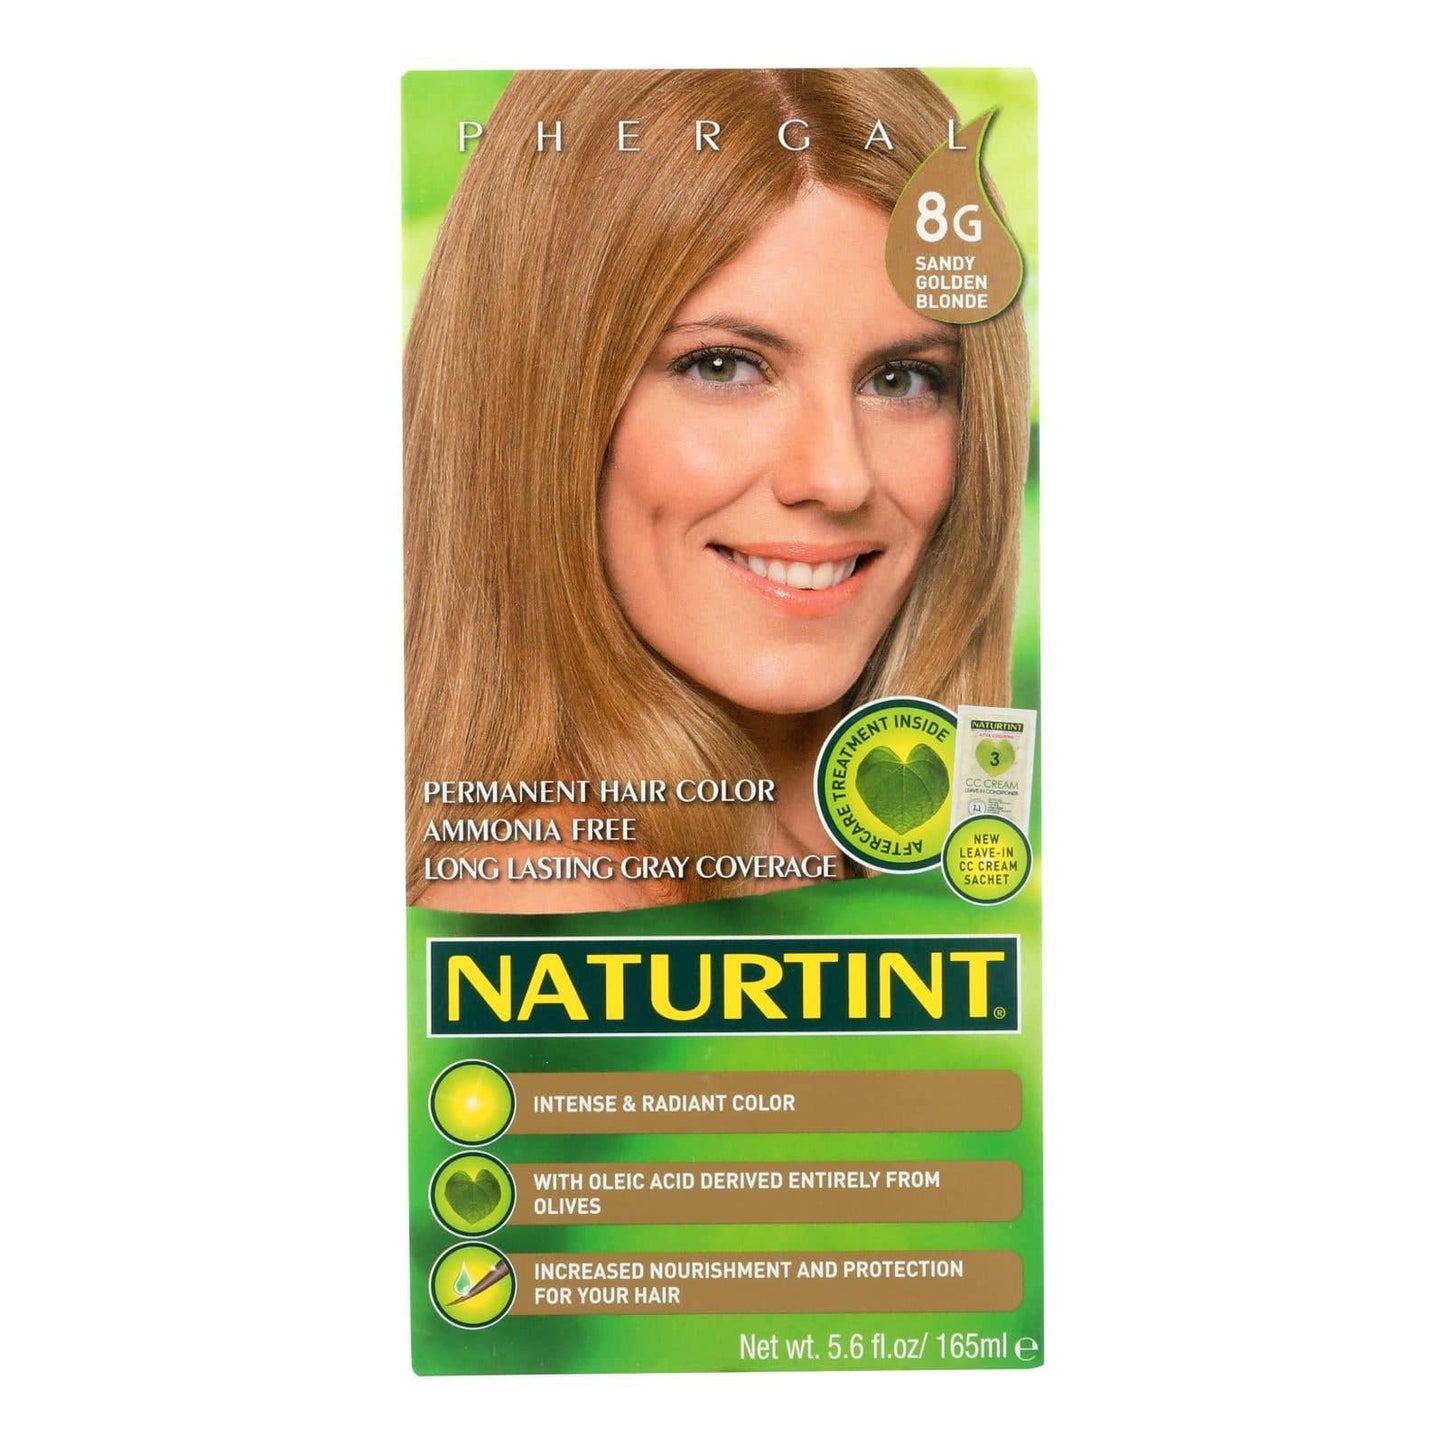 Buy Naturtint Hair Color - Permanent - 8g - Sandy Golden Blonde - 5.28 Oz  at OnlyNaturals.us